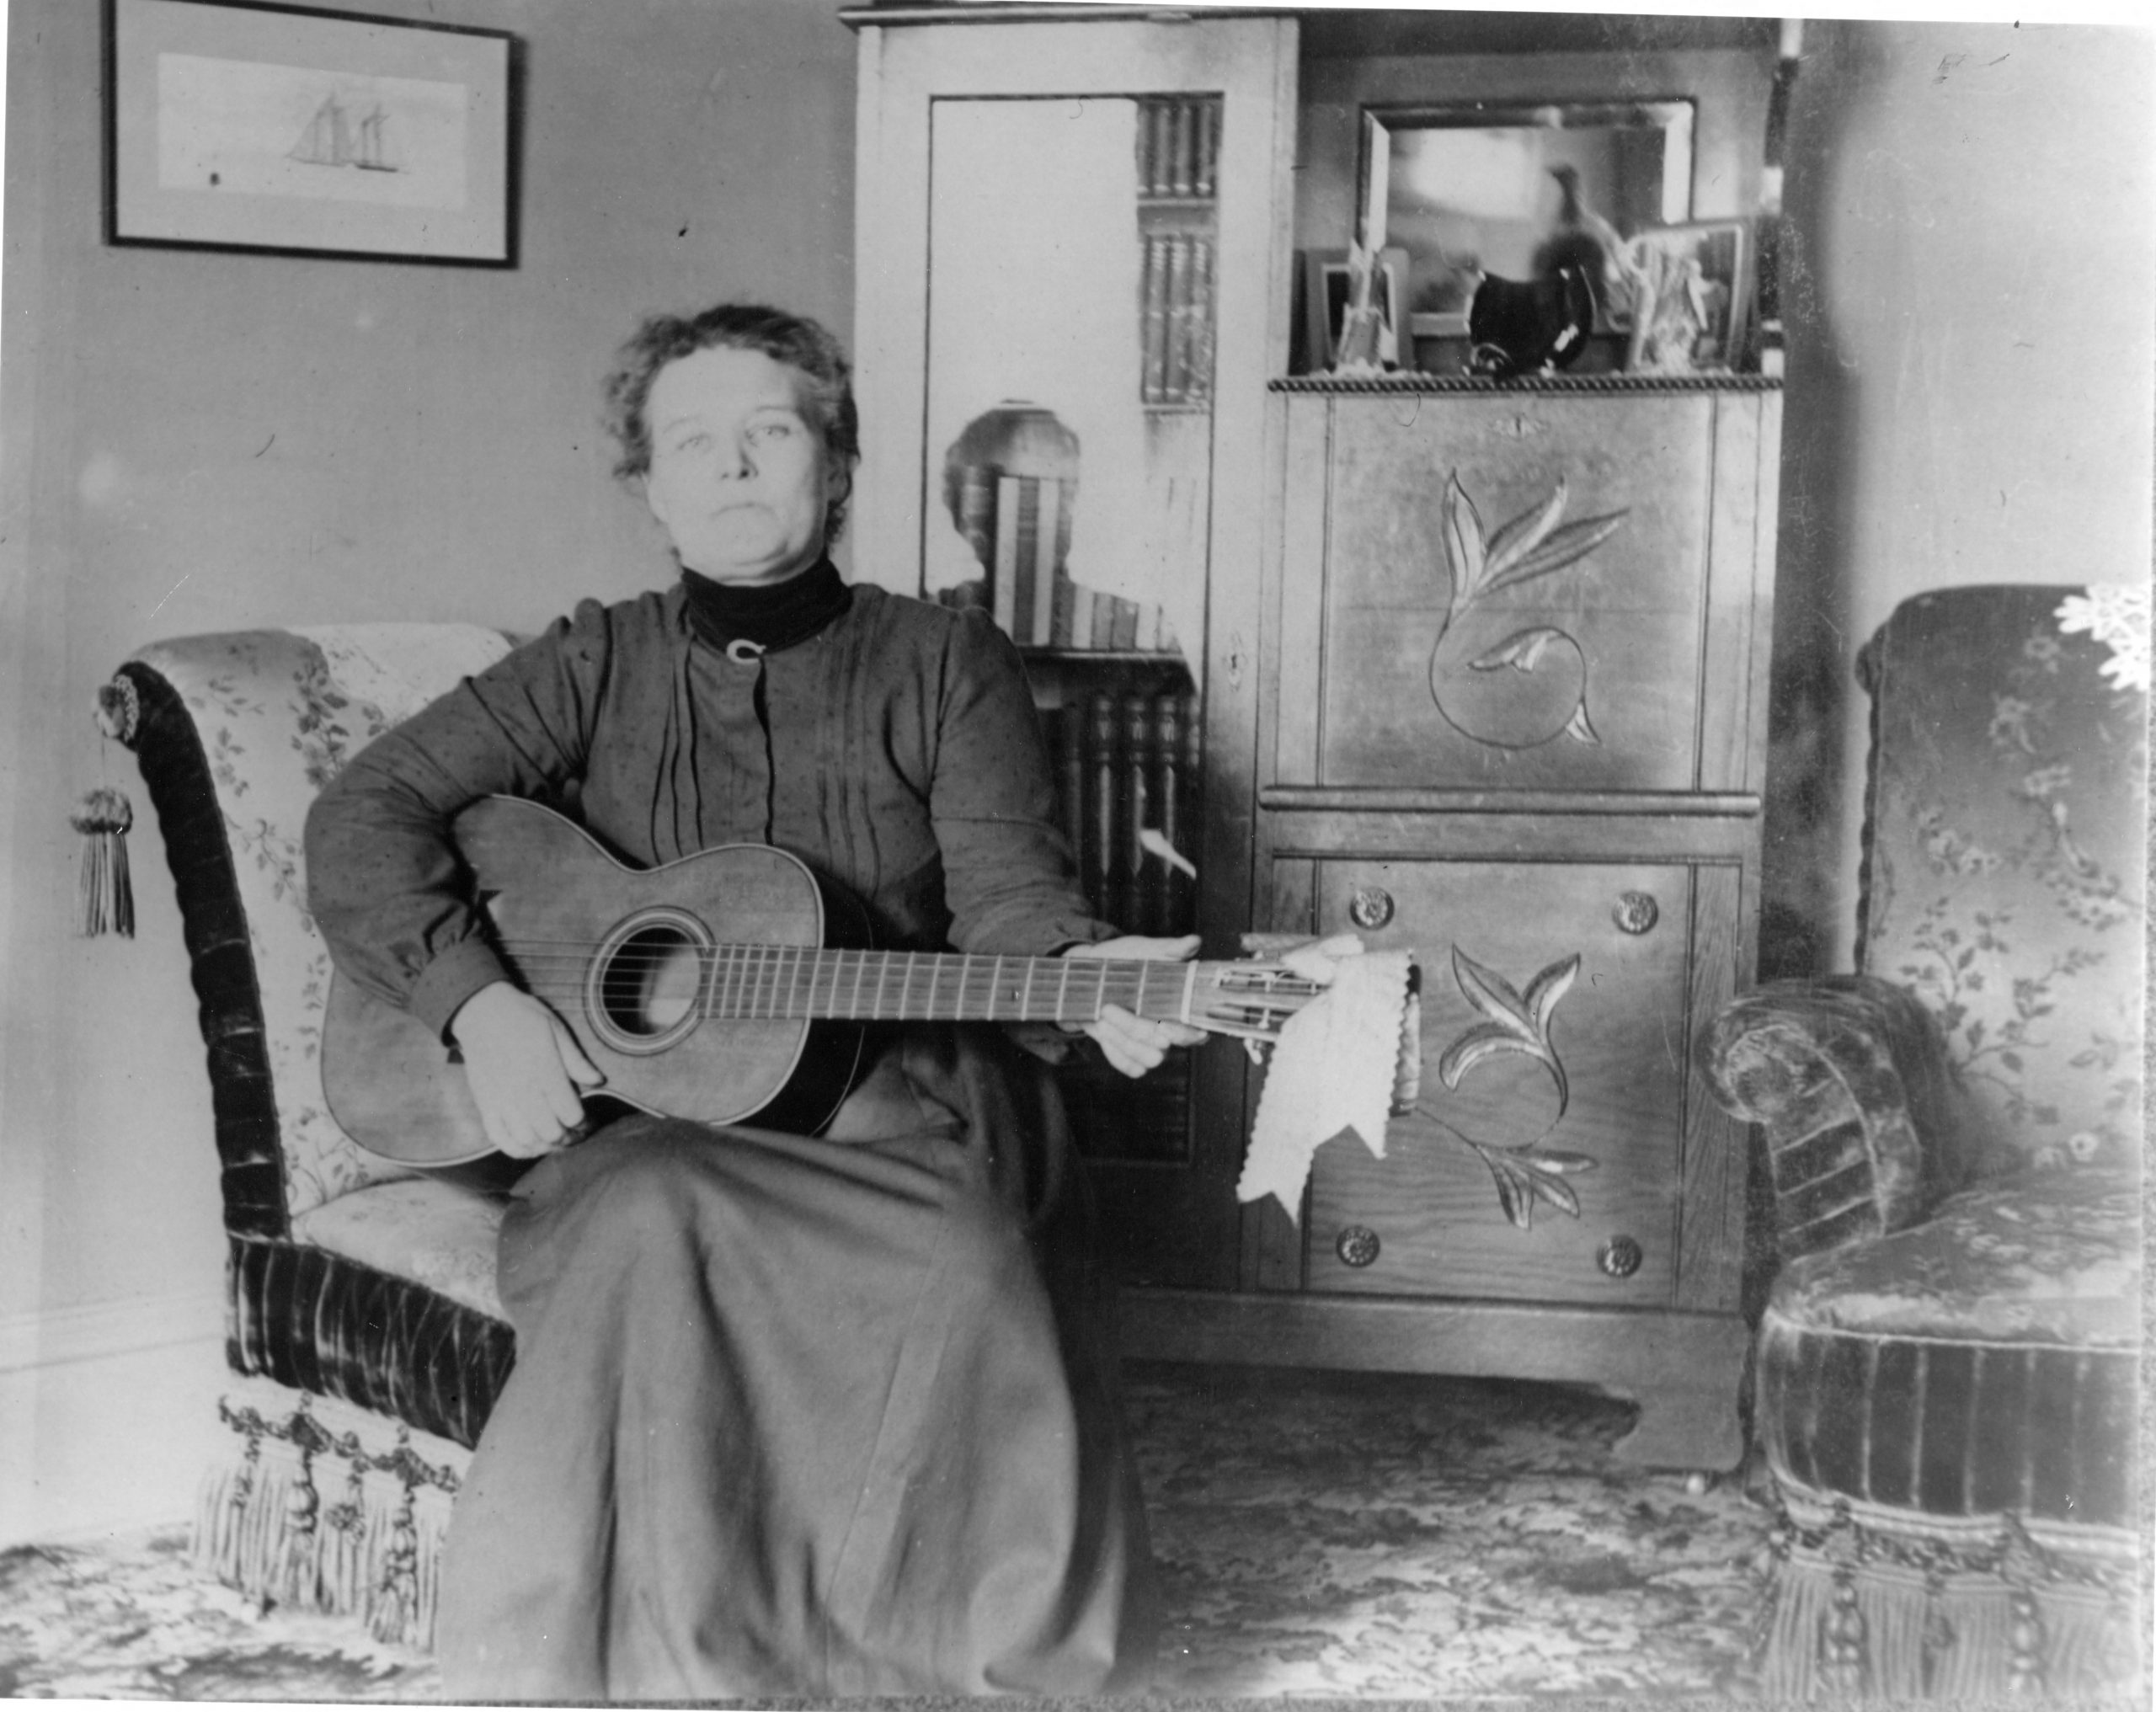 Many Utah homes contained musical instruments. Here a woman poses with her guitar around the turn of the 20th century.